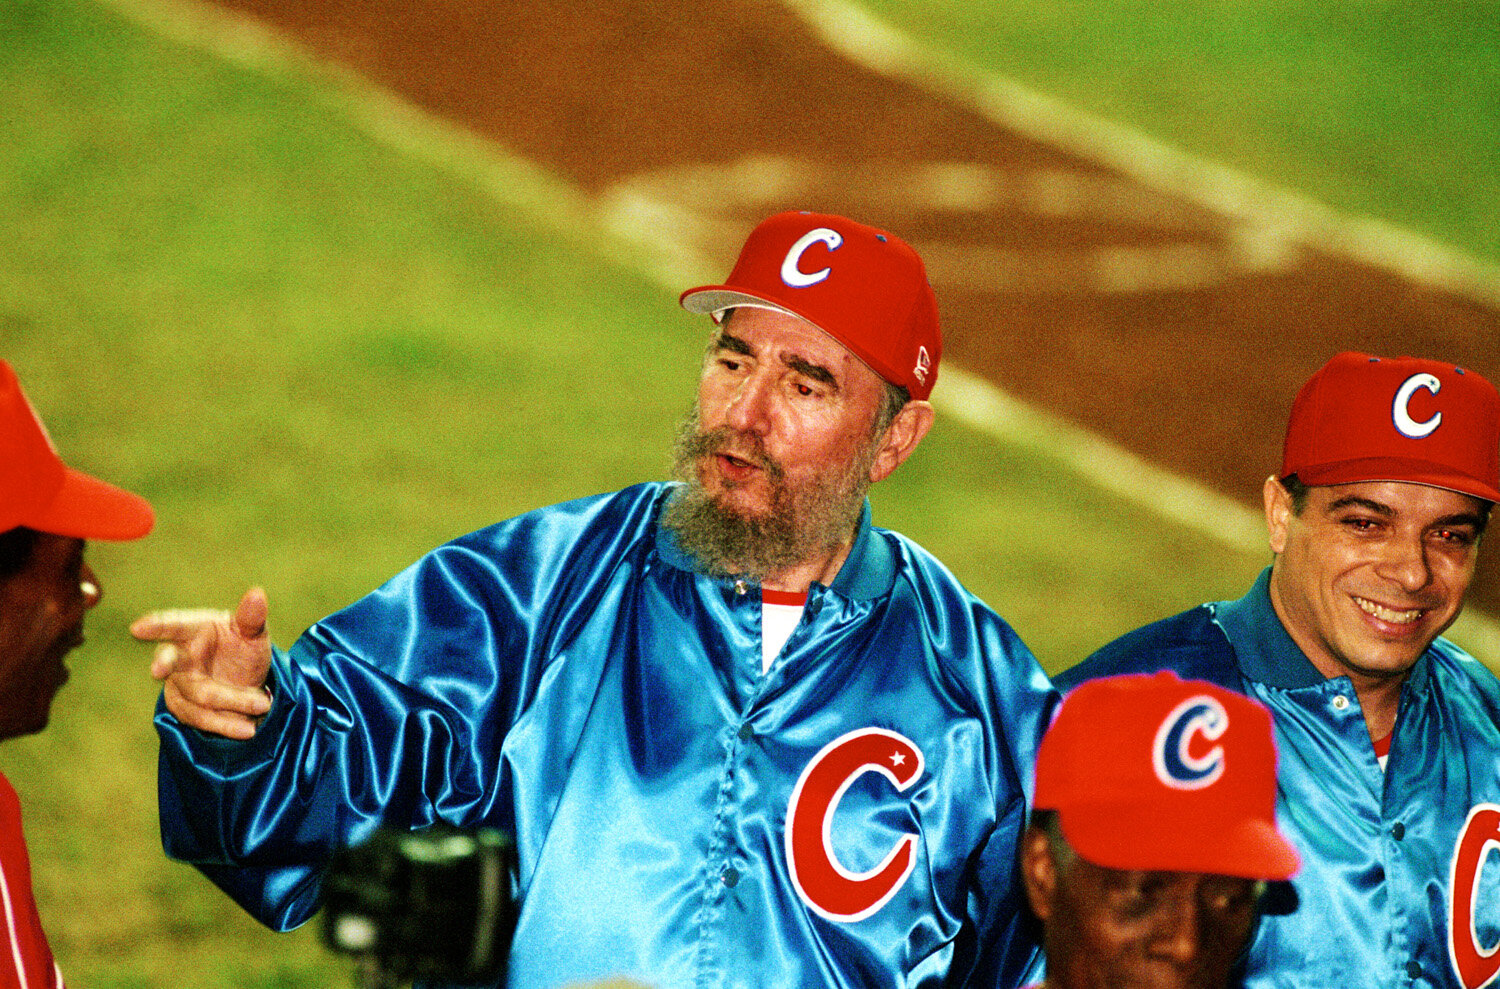  Fidel Castro in baseball wear as acting team manager, stands next to Felipe Perez Roque, Cuba's Foreign Minister, during a friendly baseball match between Cuba and Venezuela, on November 18, 1999, in Havana, Cuba. The match was supposed to feature o